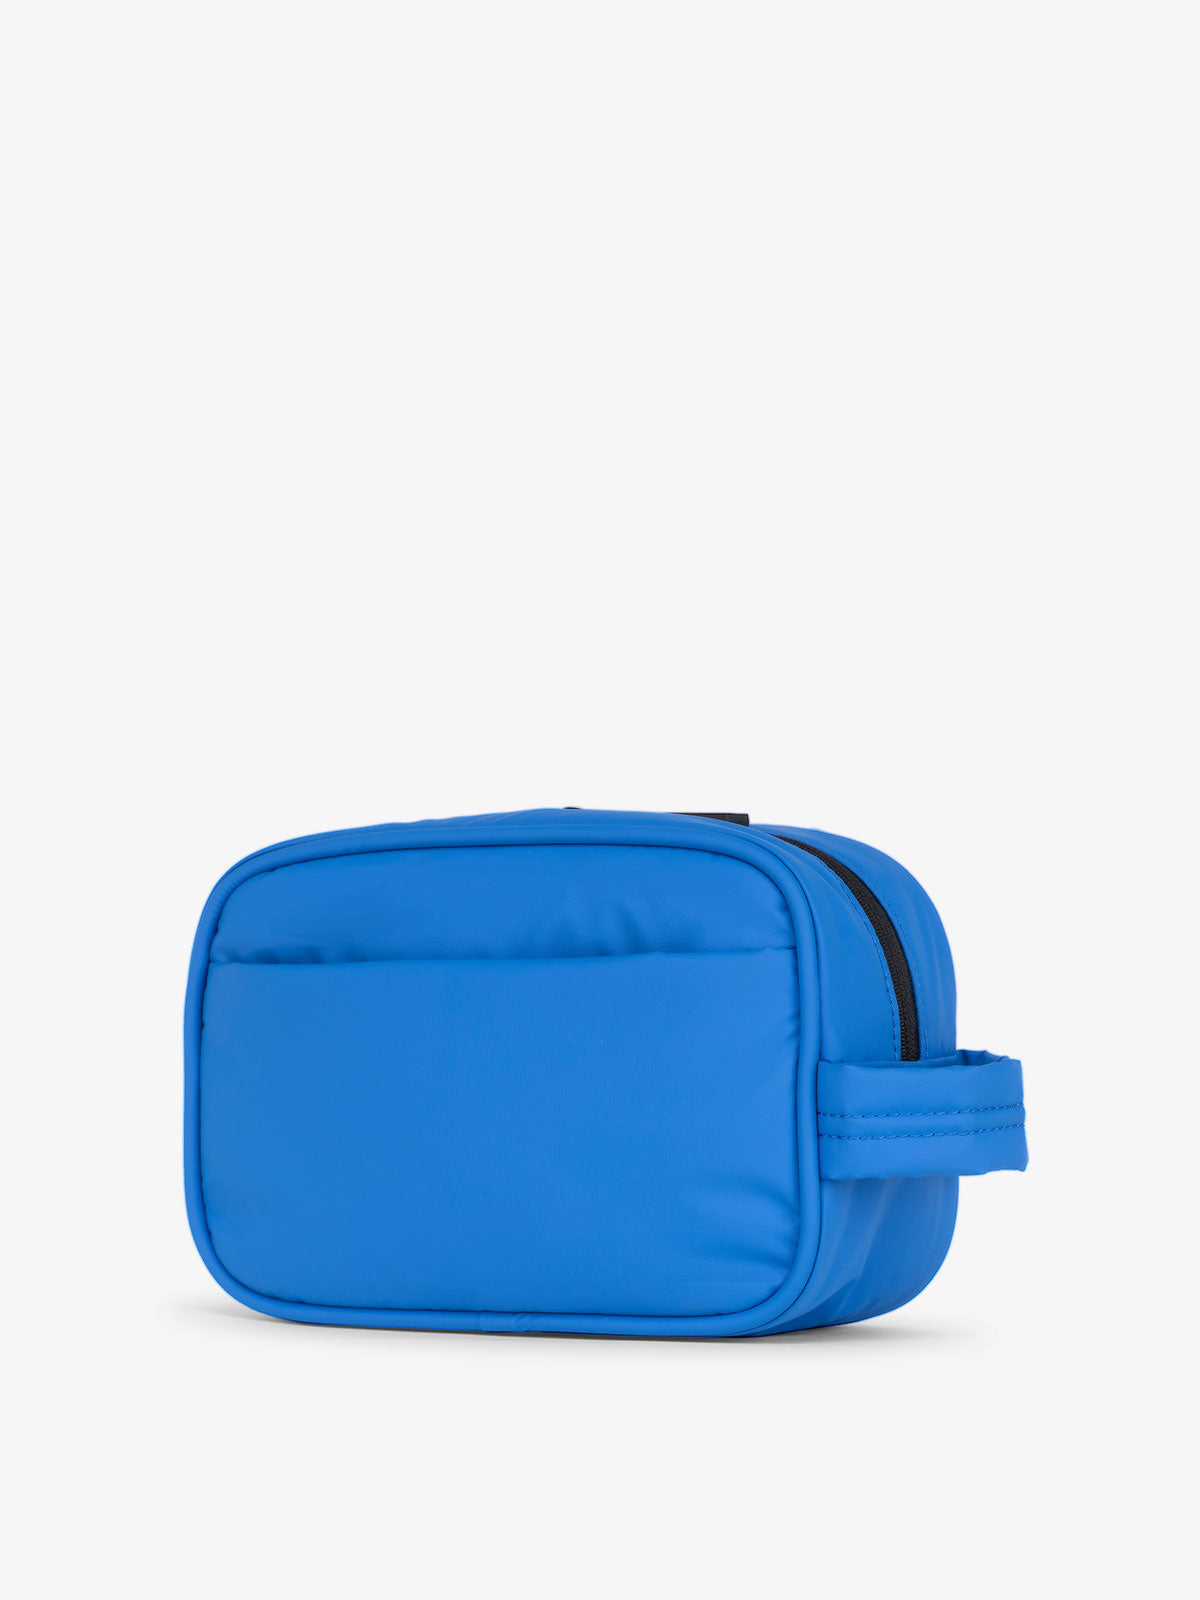 quilted toiletry bag with handle in blue